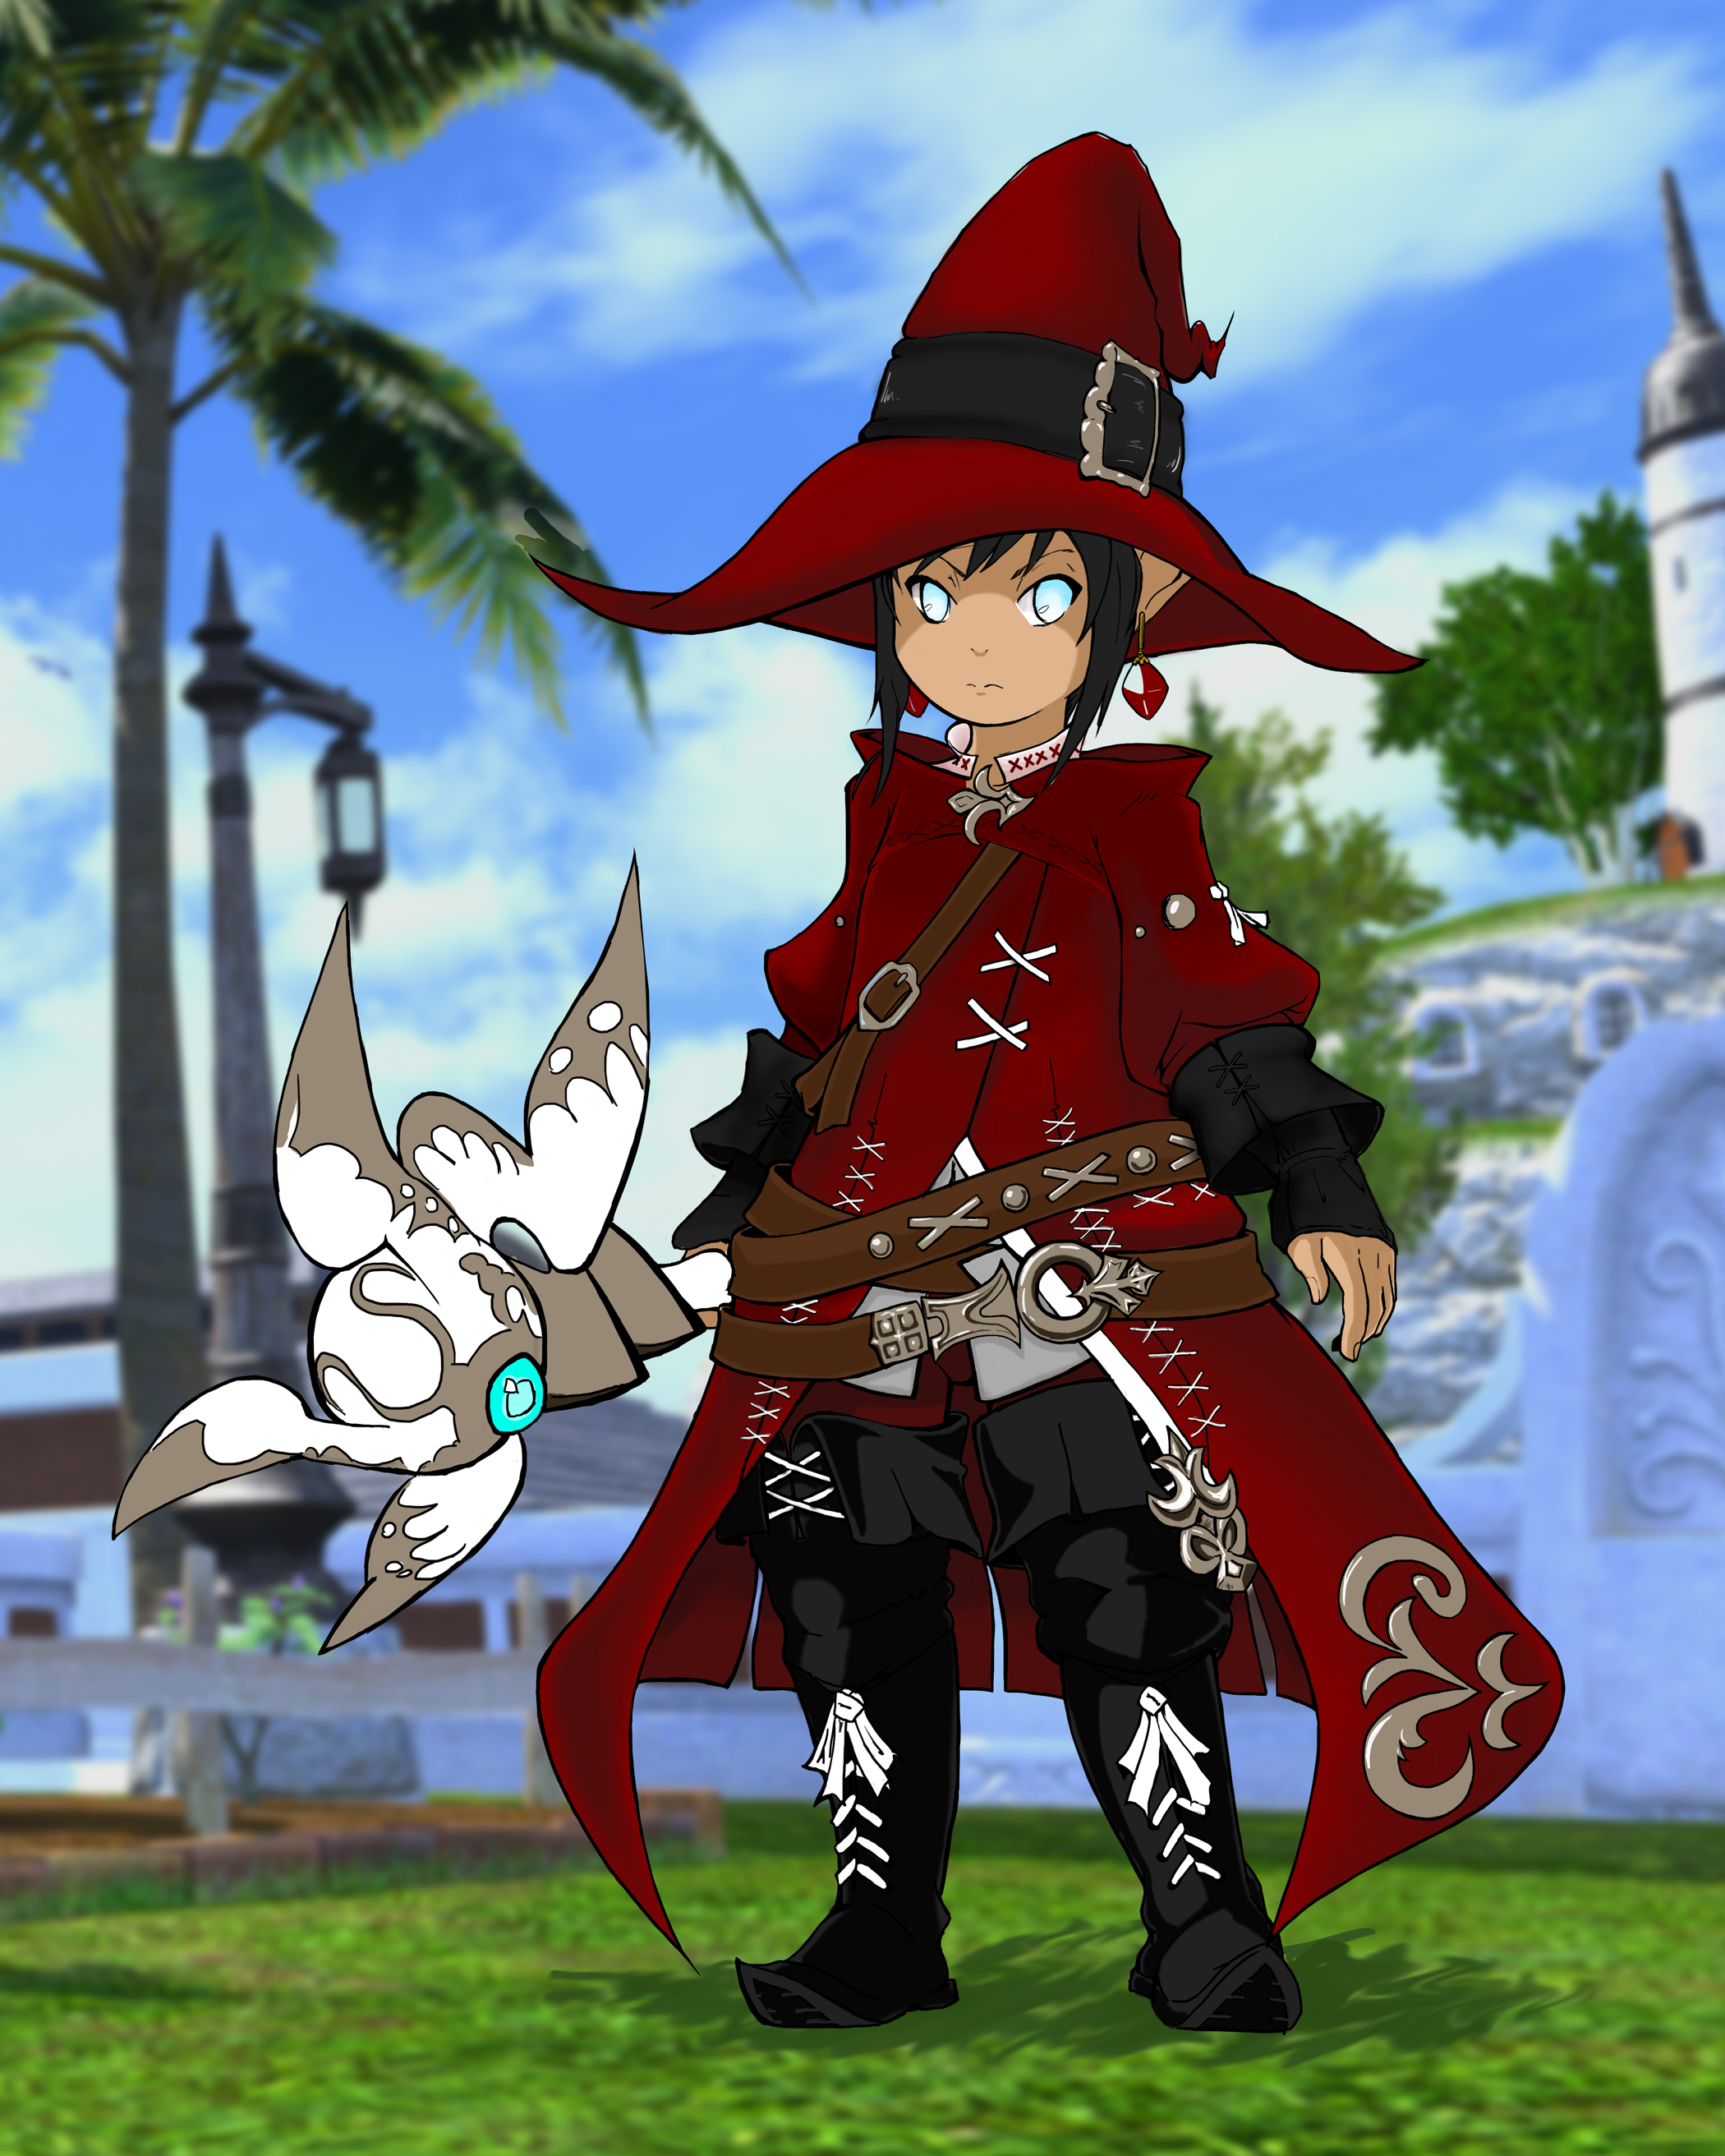 Gallery of Thanos Red Mage Ffxiv.